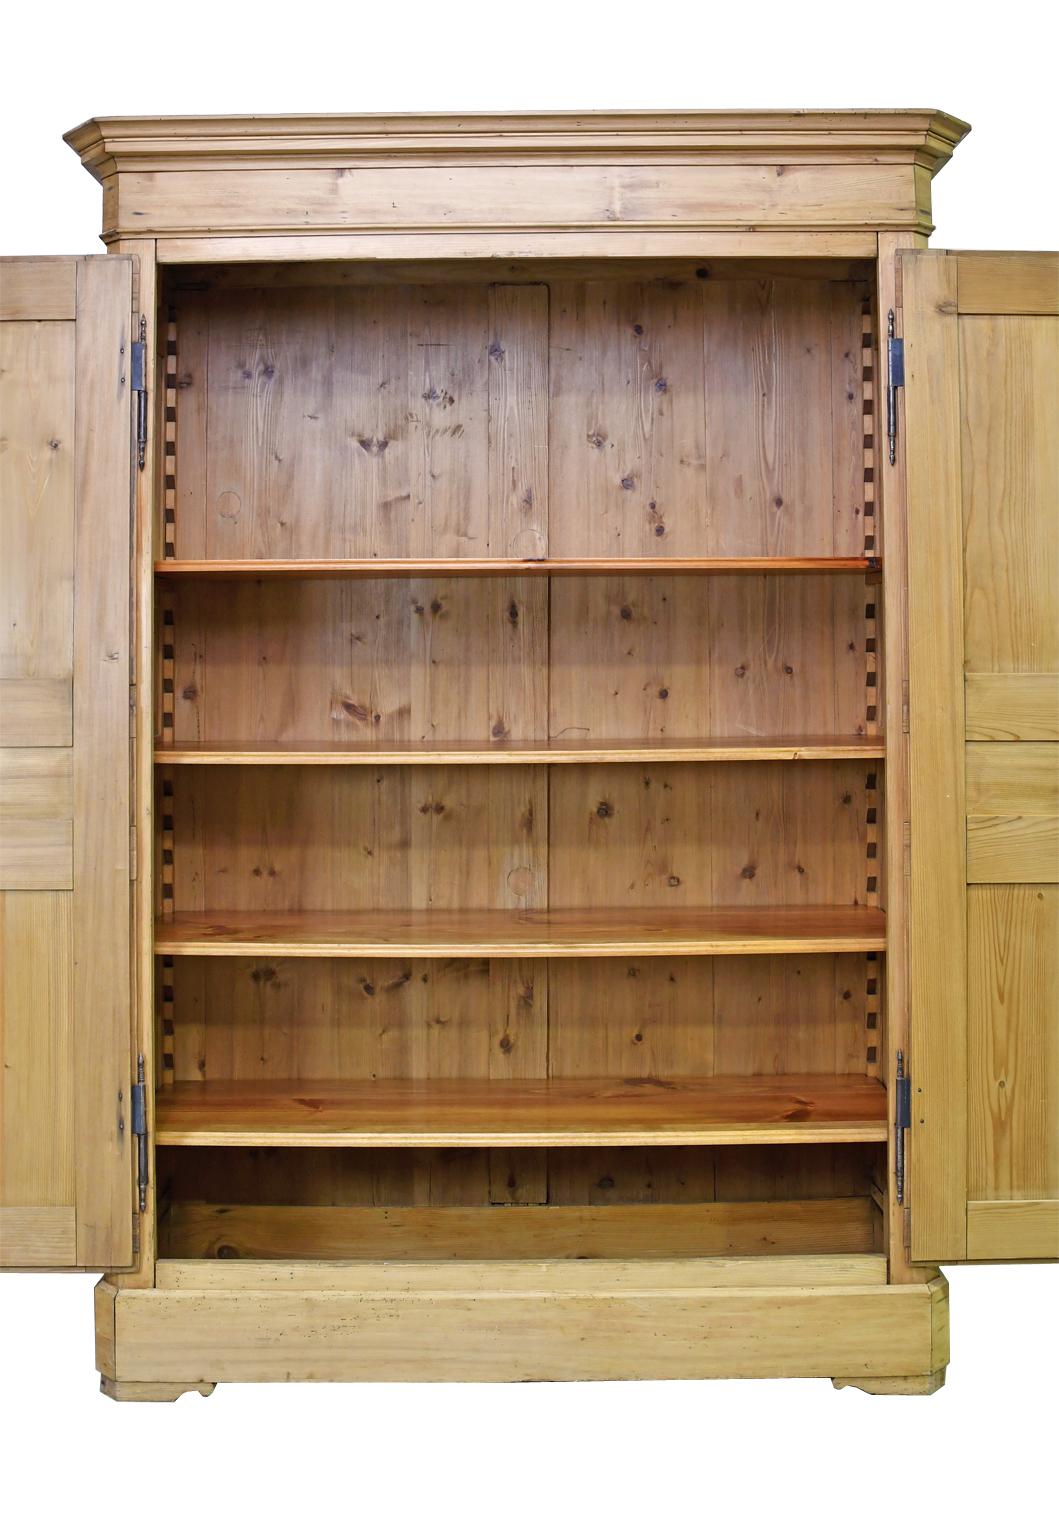 A charming wardrobe or armoire in a light honey-colored pine with two paneled doors & sides, and four adjustable interior shelves. Doors are on original steel butt hinges allowing them to open 180 degrees, with wooden key plate, original working